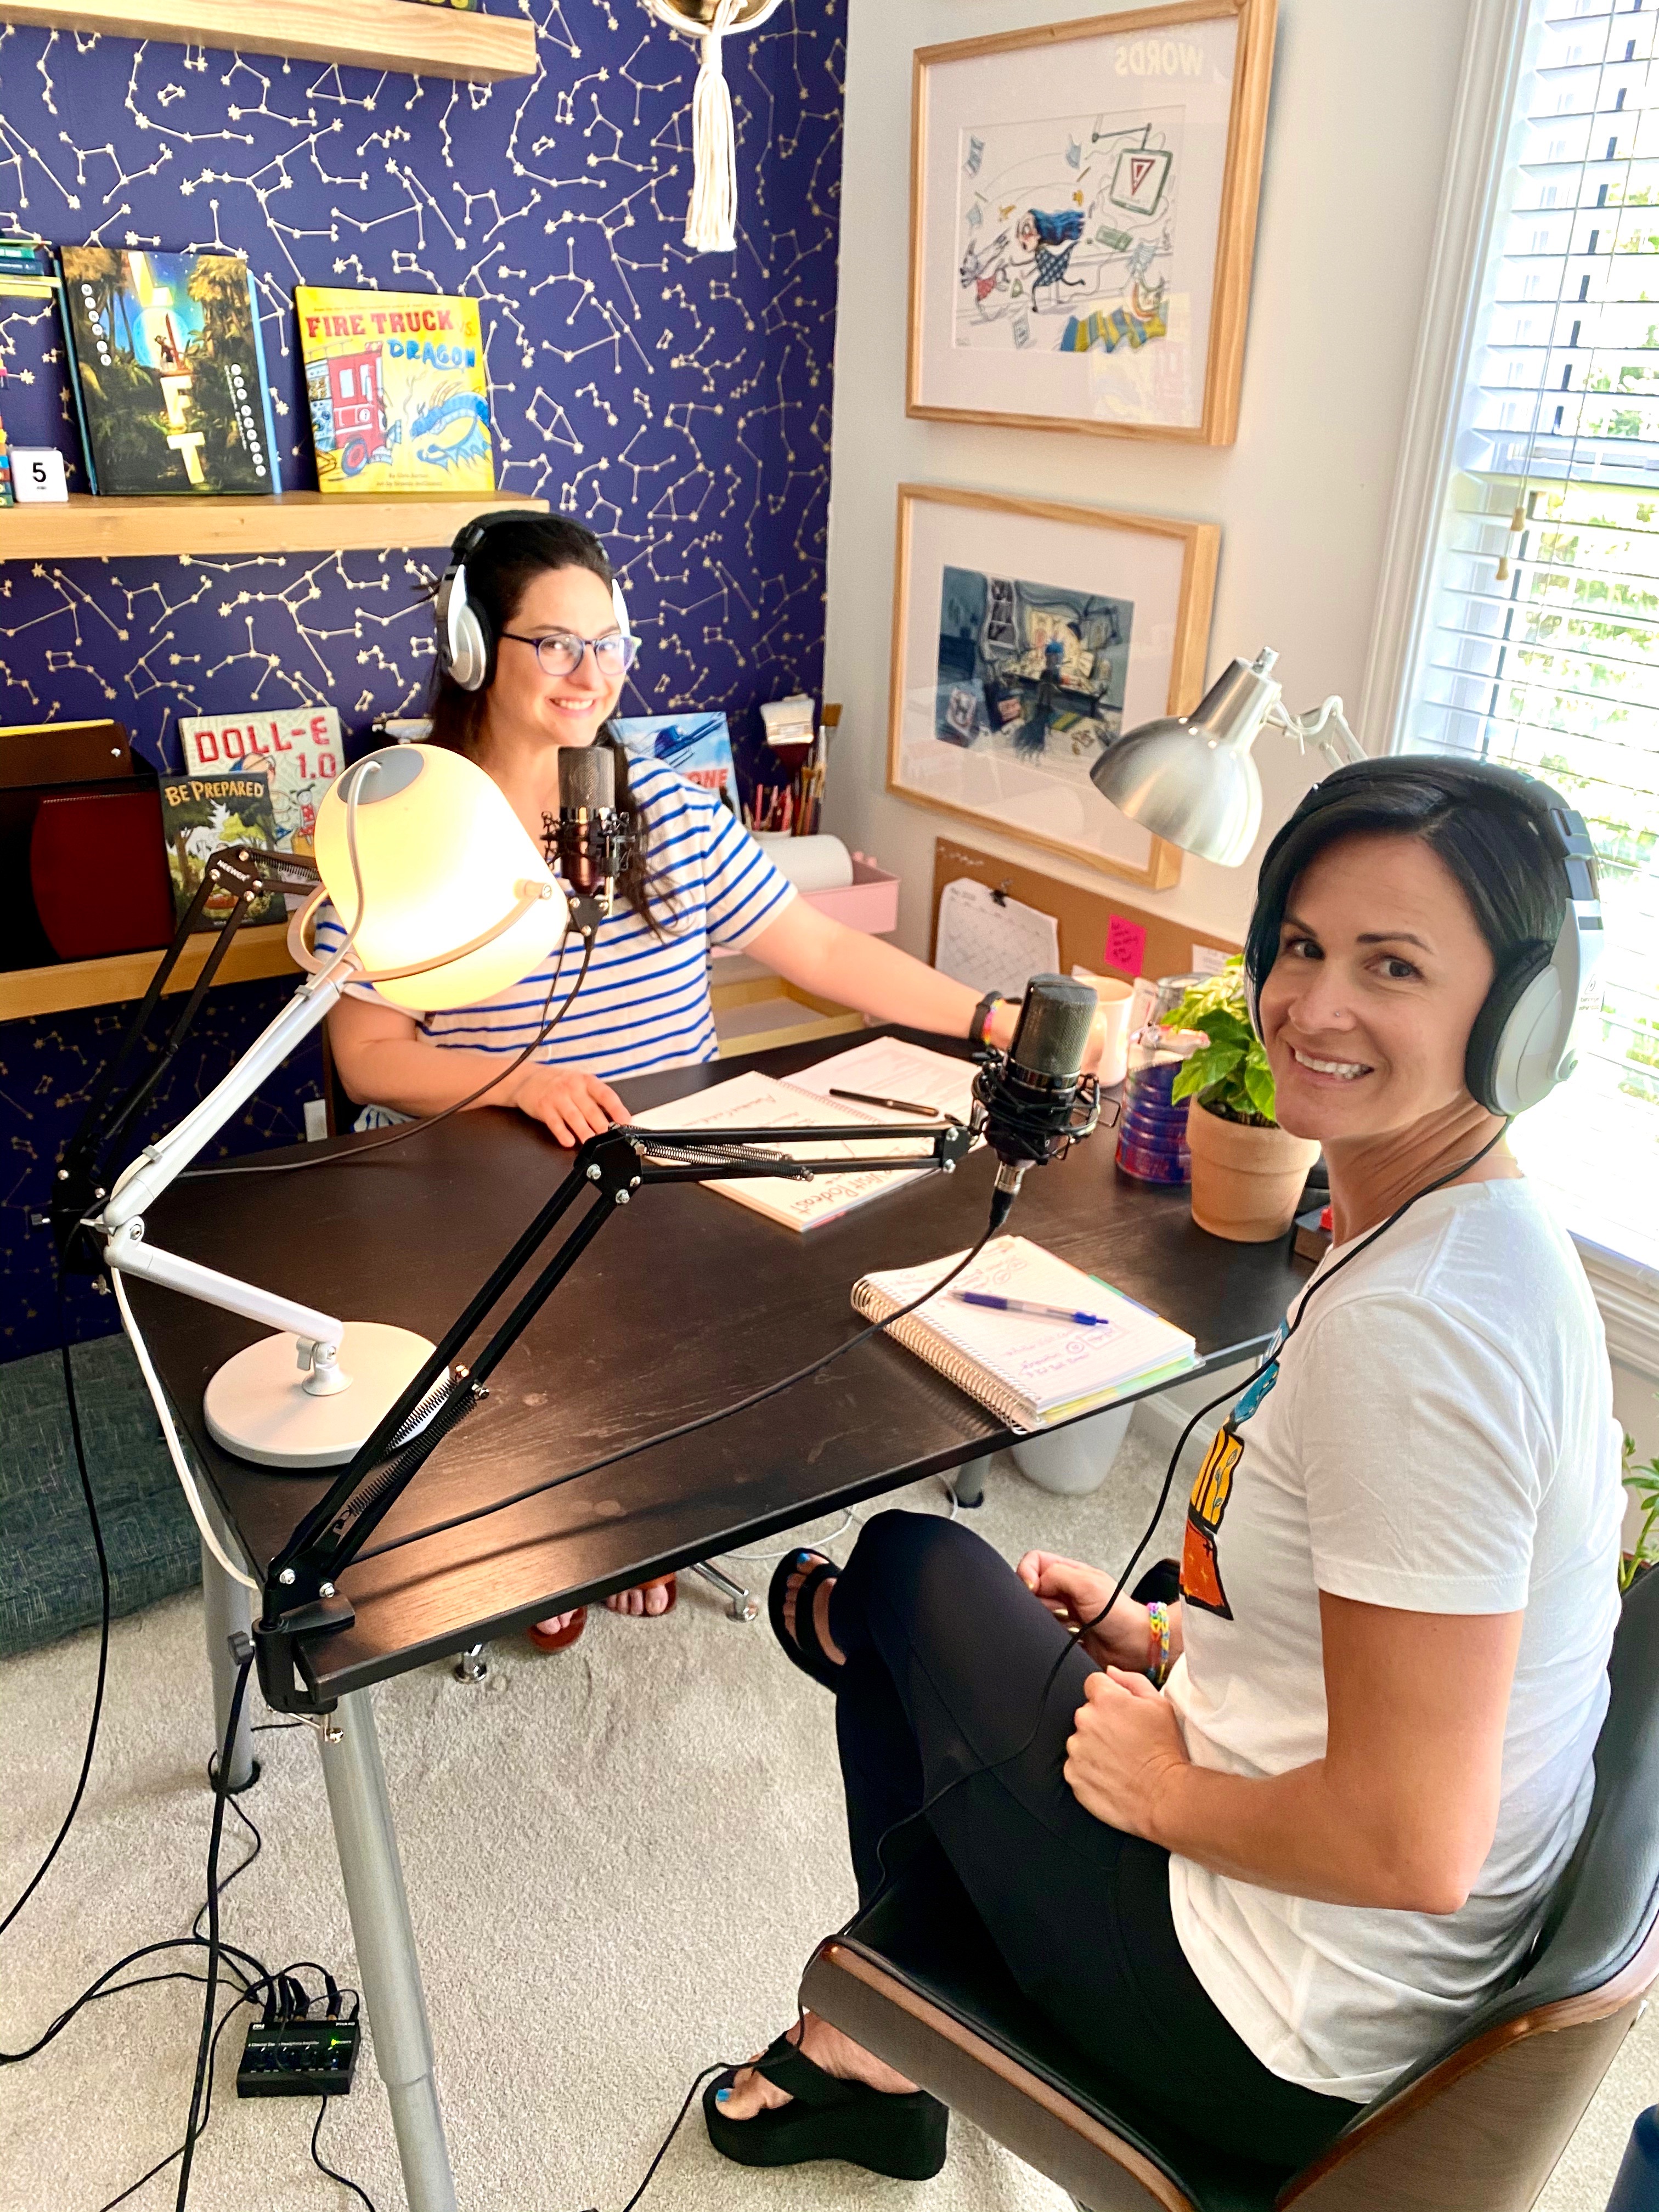 Author-illustrator Shanda McCloskey and Author Bonnie Clark record their first podcast together for the Author Visit Podcast!